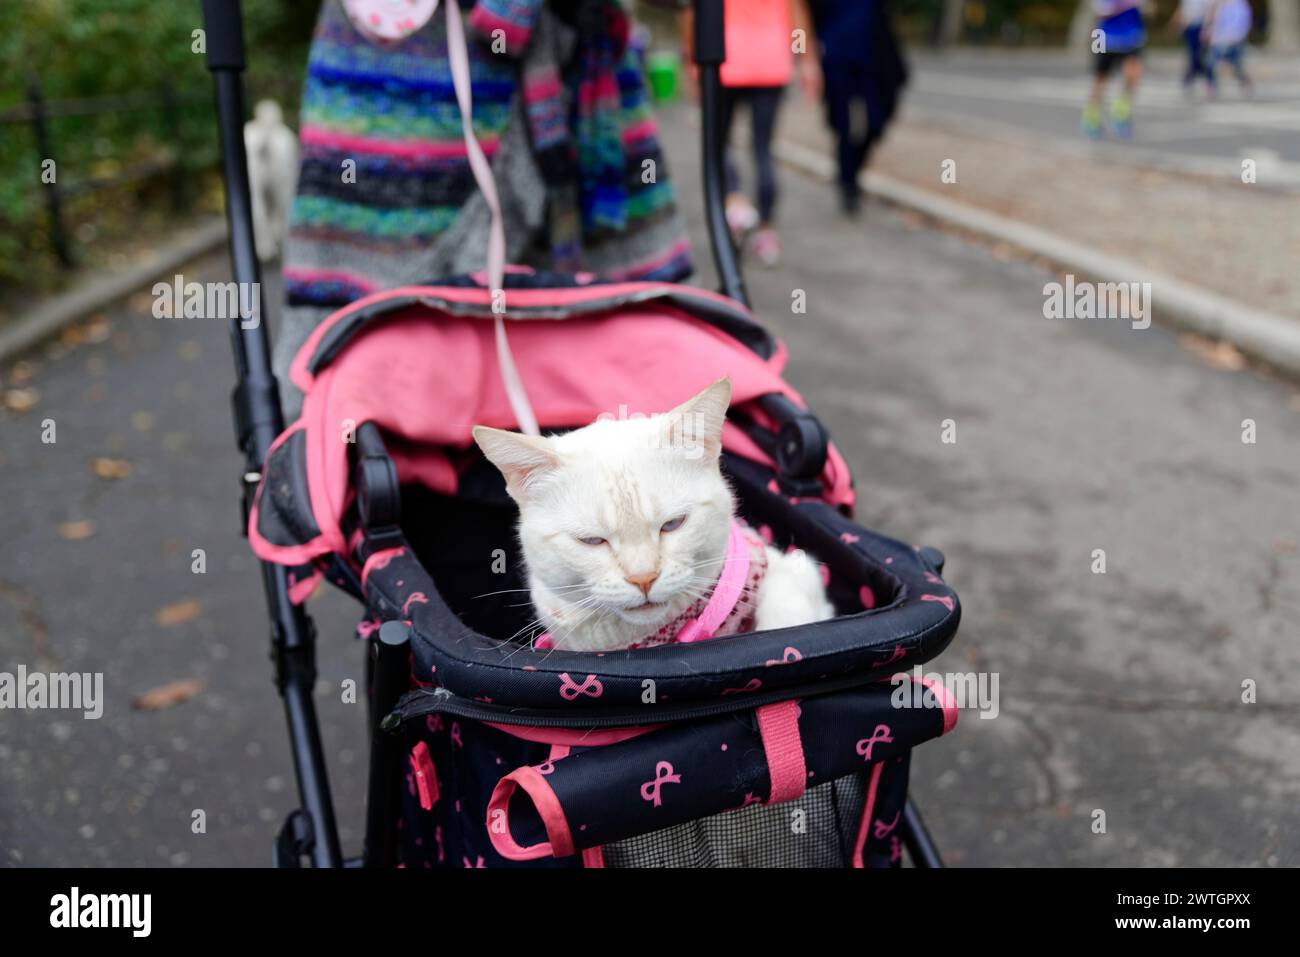 Central Park, A relaxed white cat in a pram on a city walk, Manhattan, New York City, New York, USA, North America Stock Photo